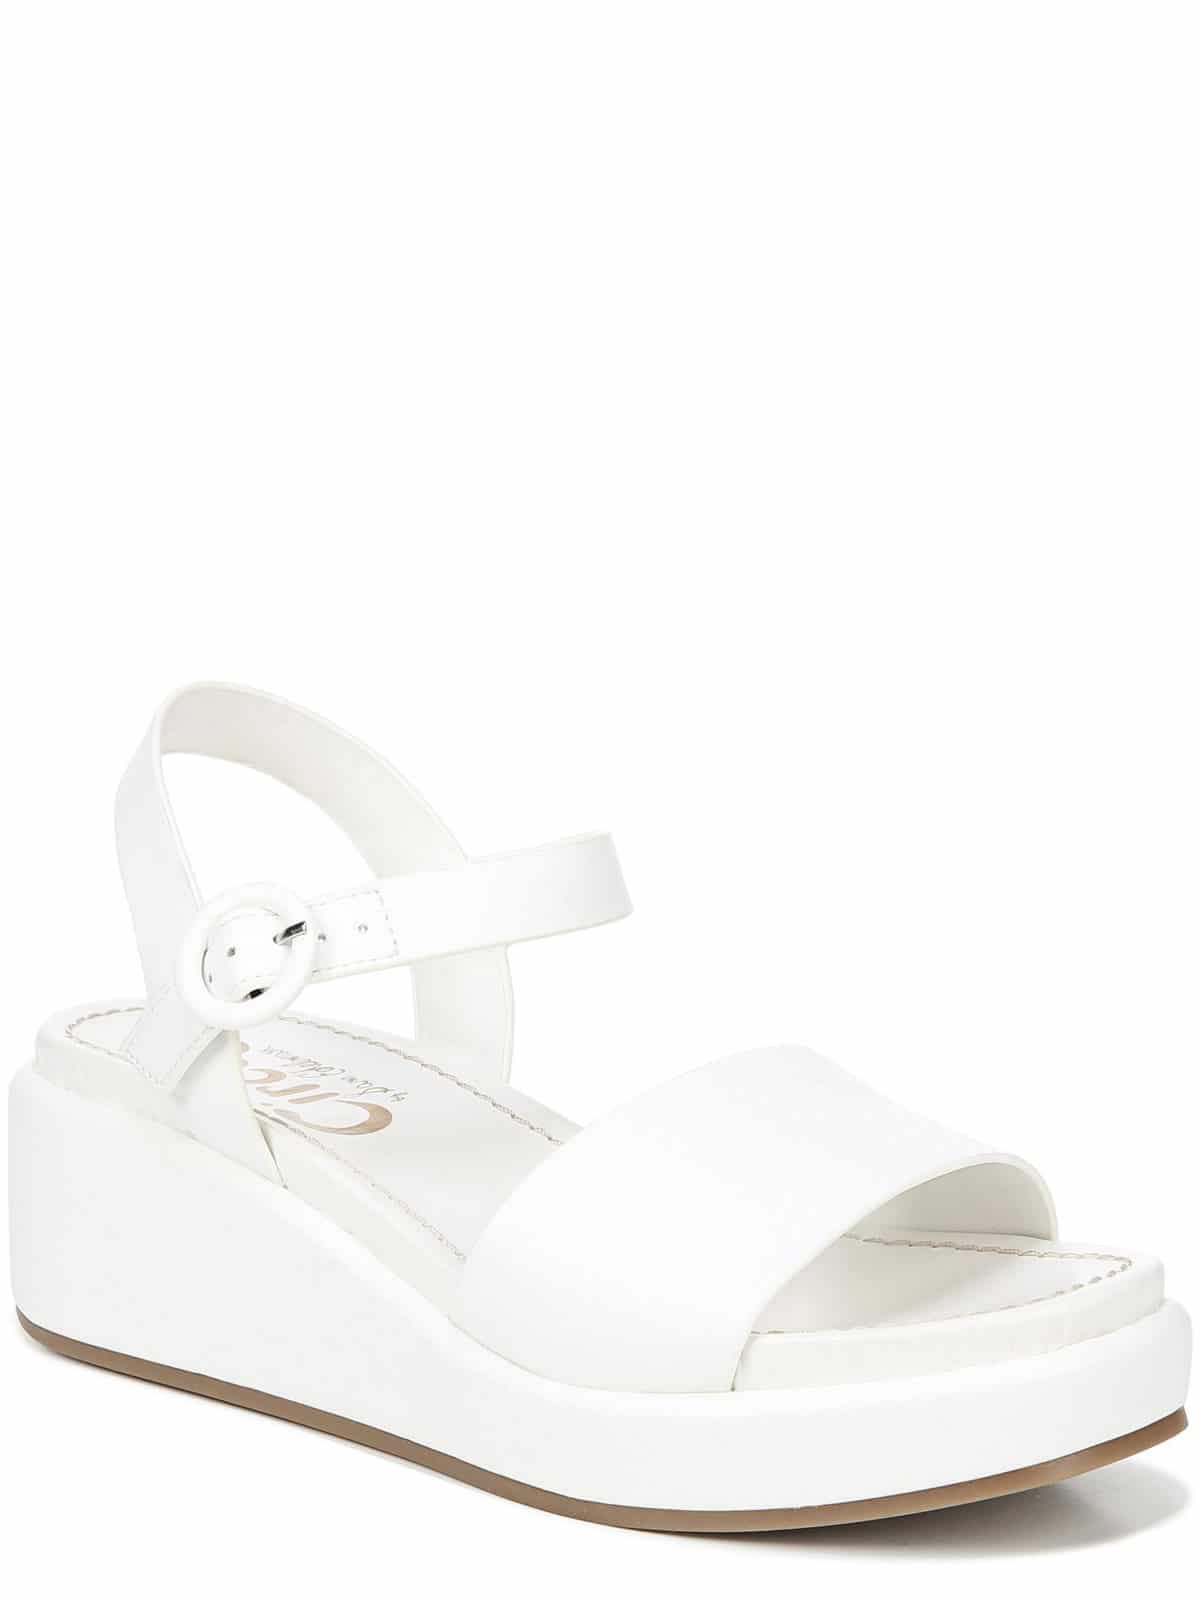 All-White Everything: Shop These 7 Warm-Weather Essentials - Essence